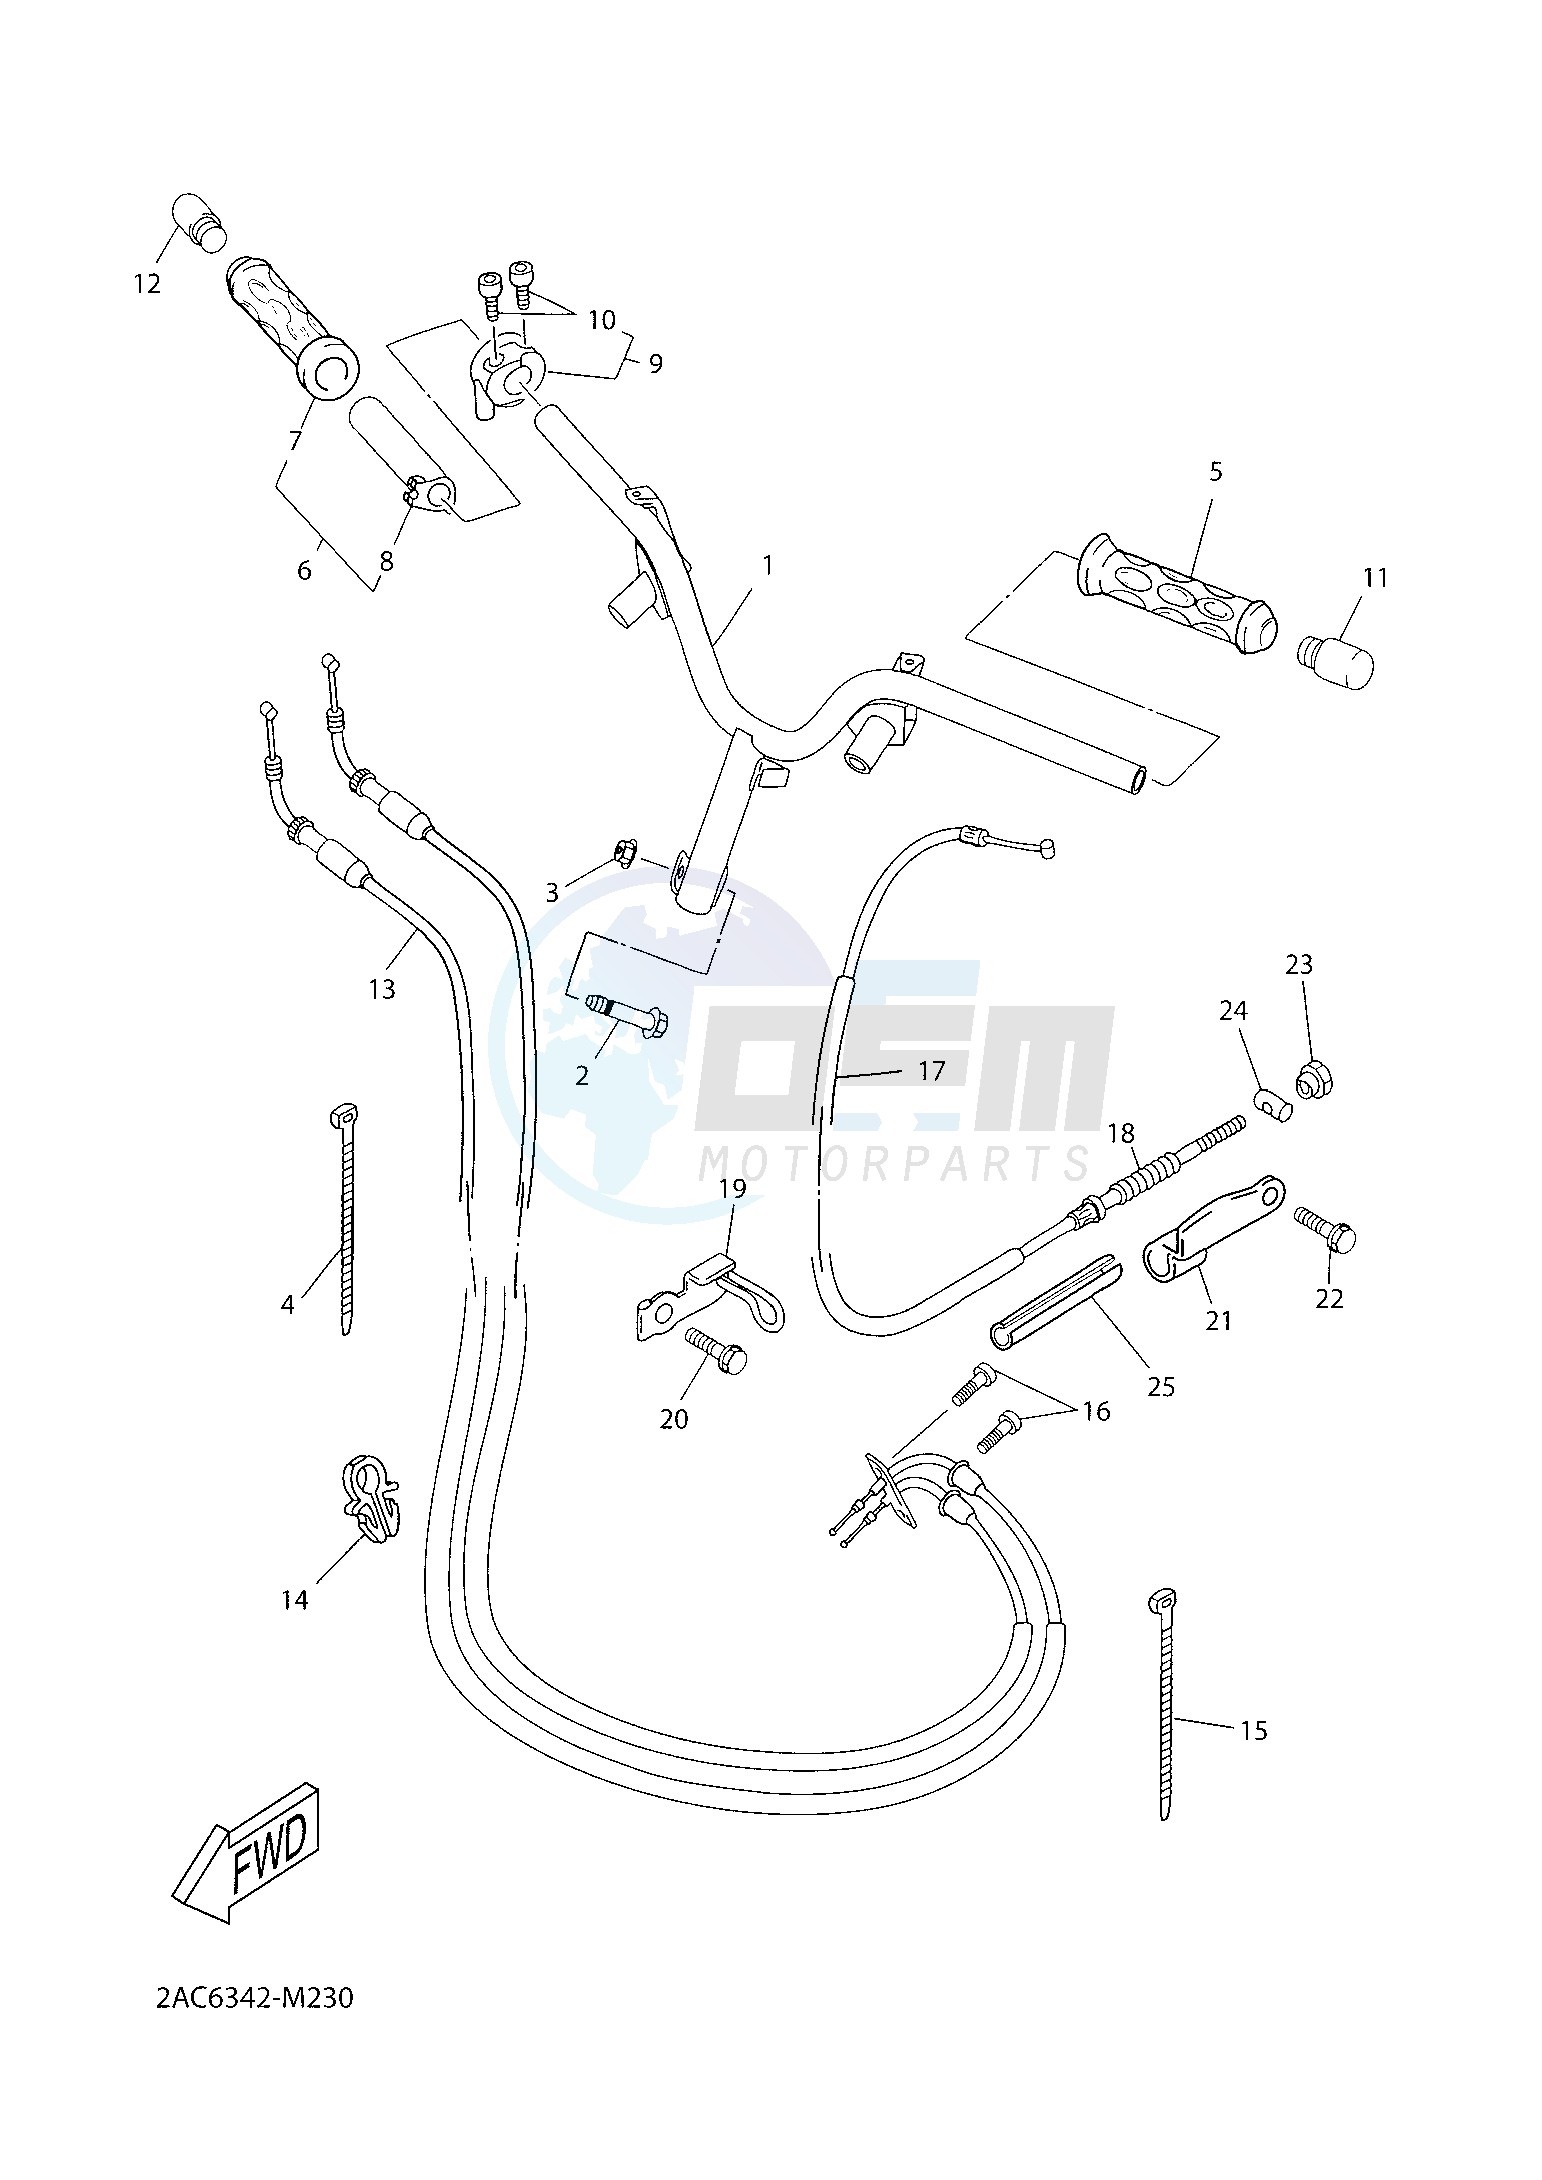 STEERING HANDLE & CABLE 1 blueprint